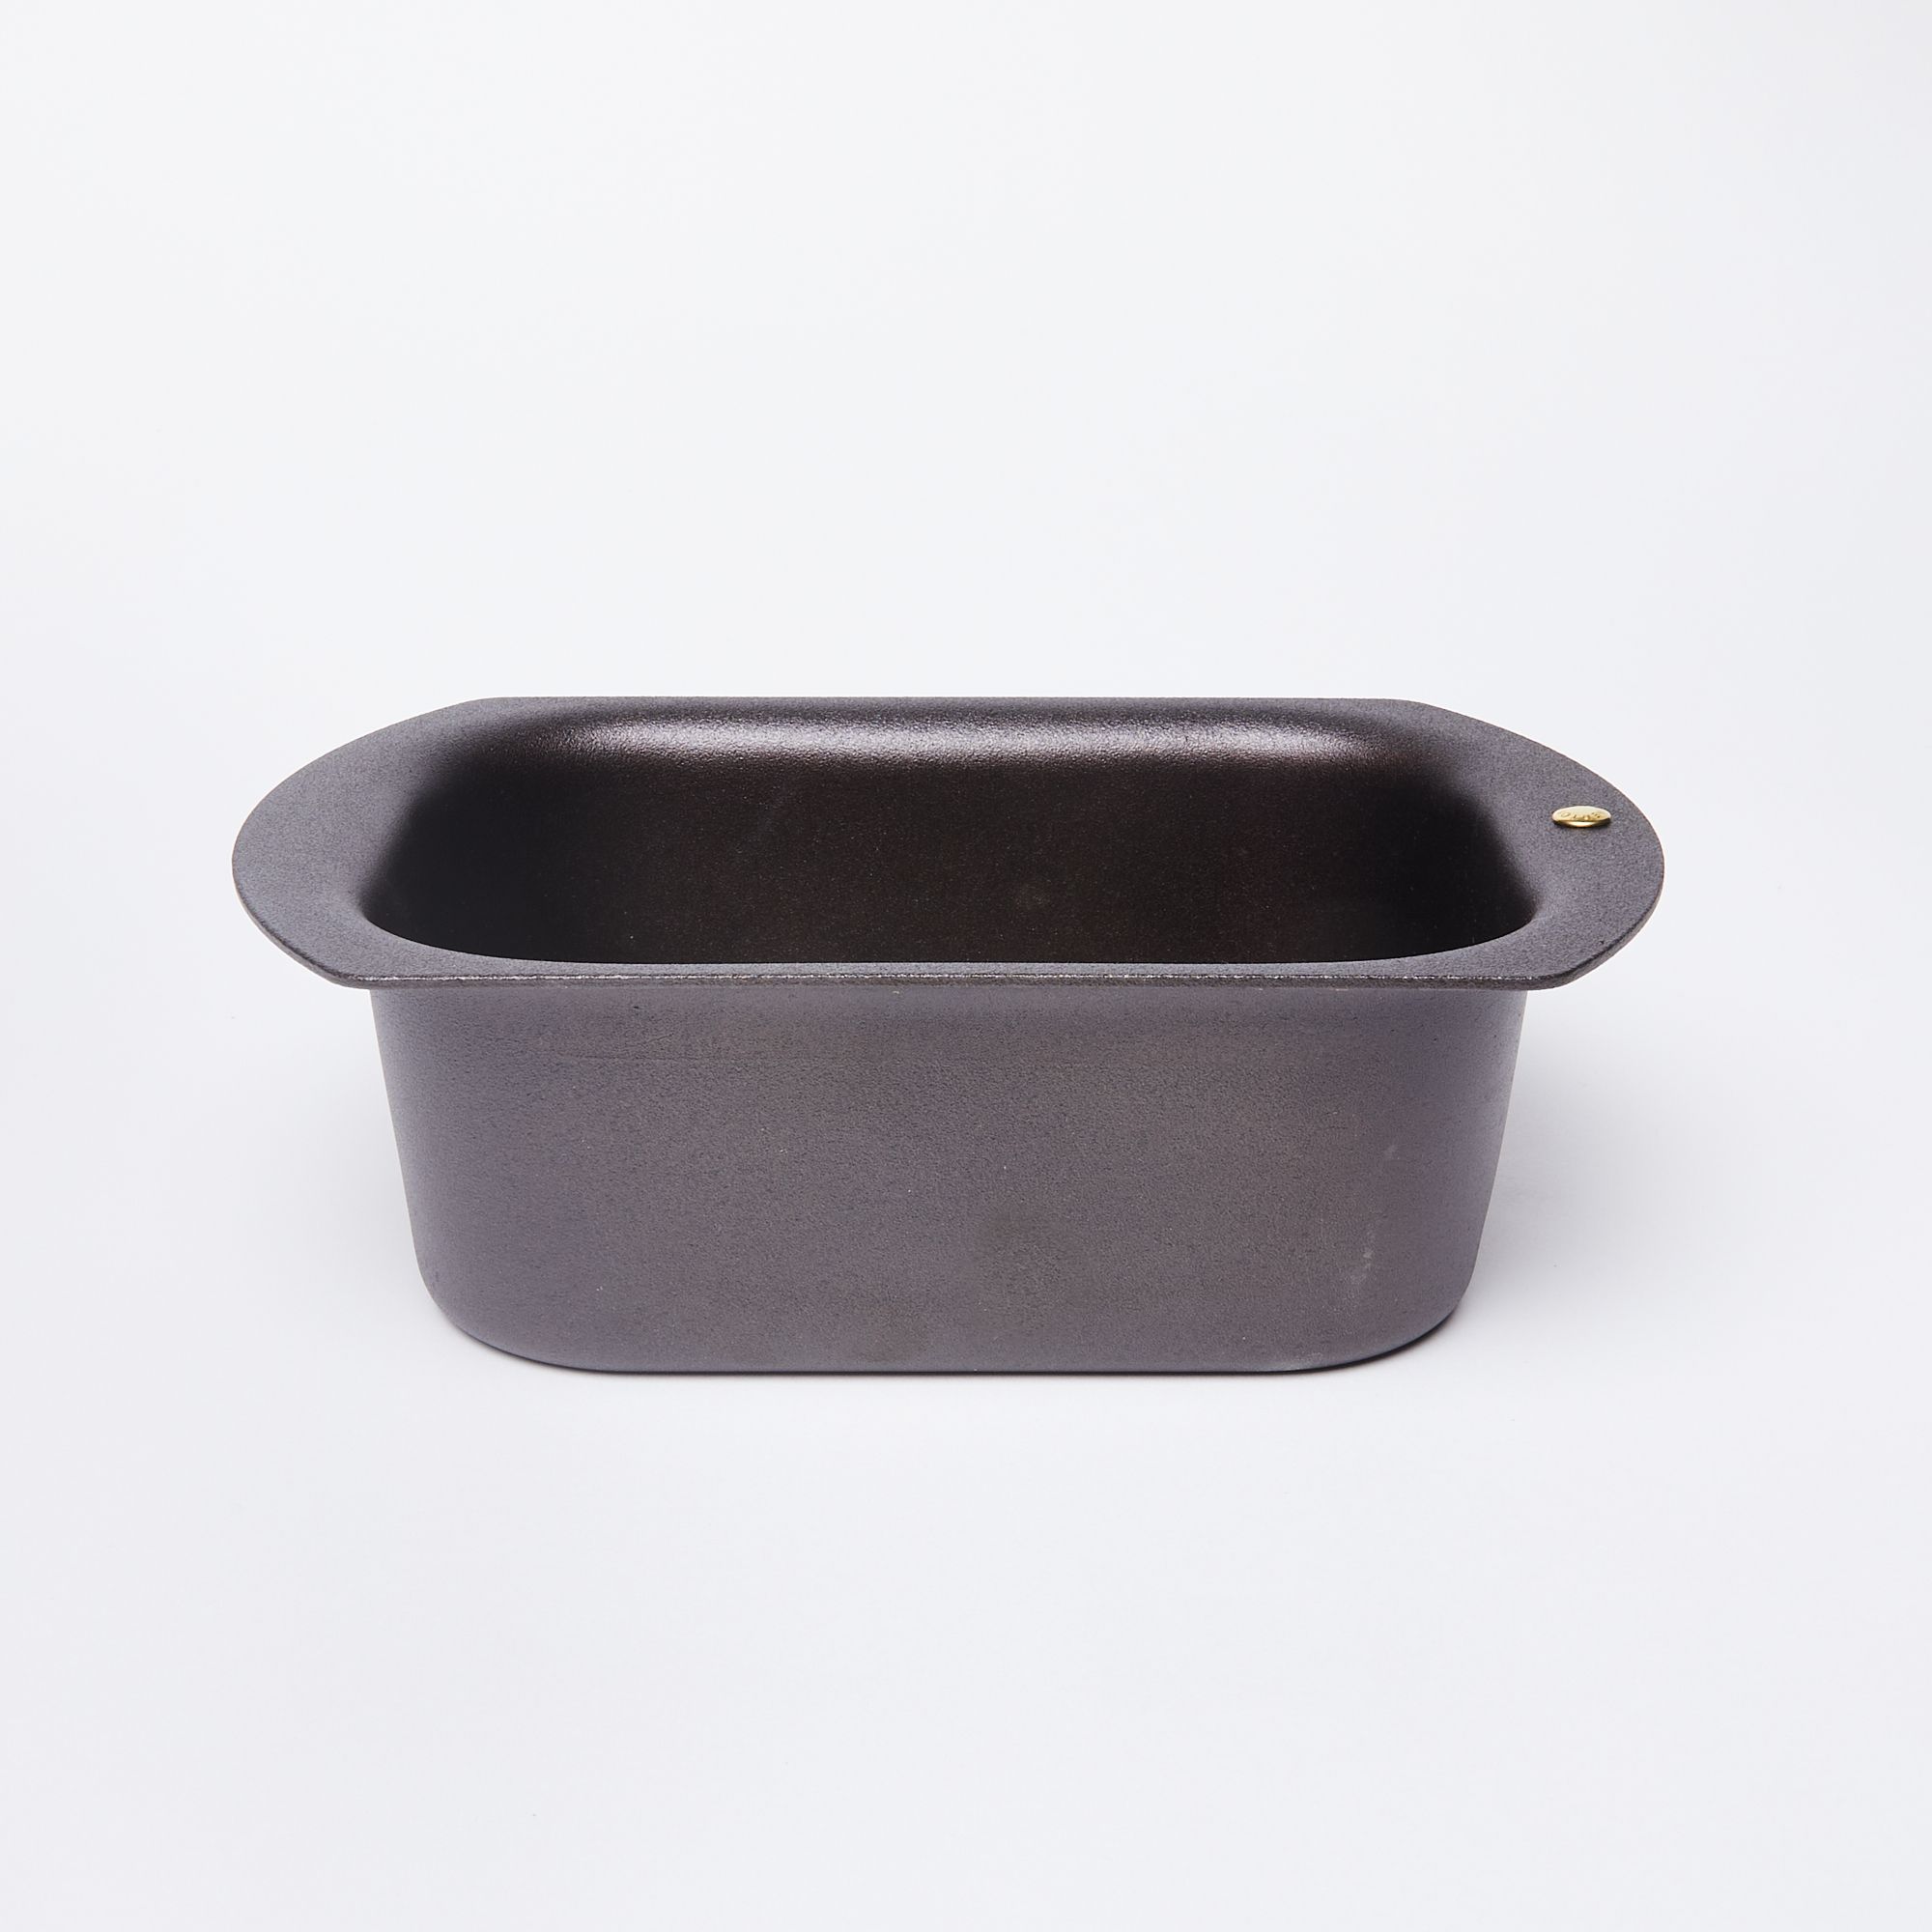 A black metal loaf pan with rounded corners and a wide flat lip